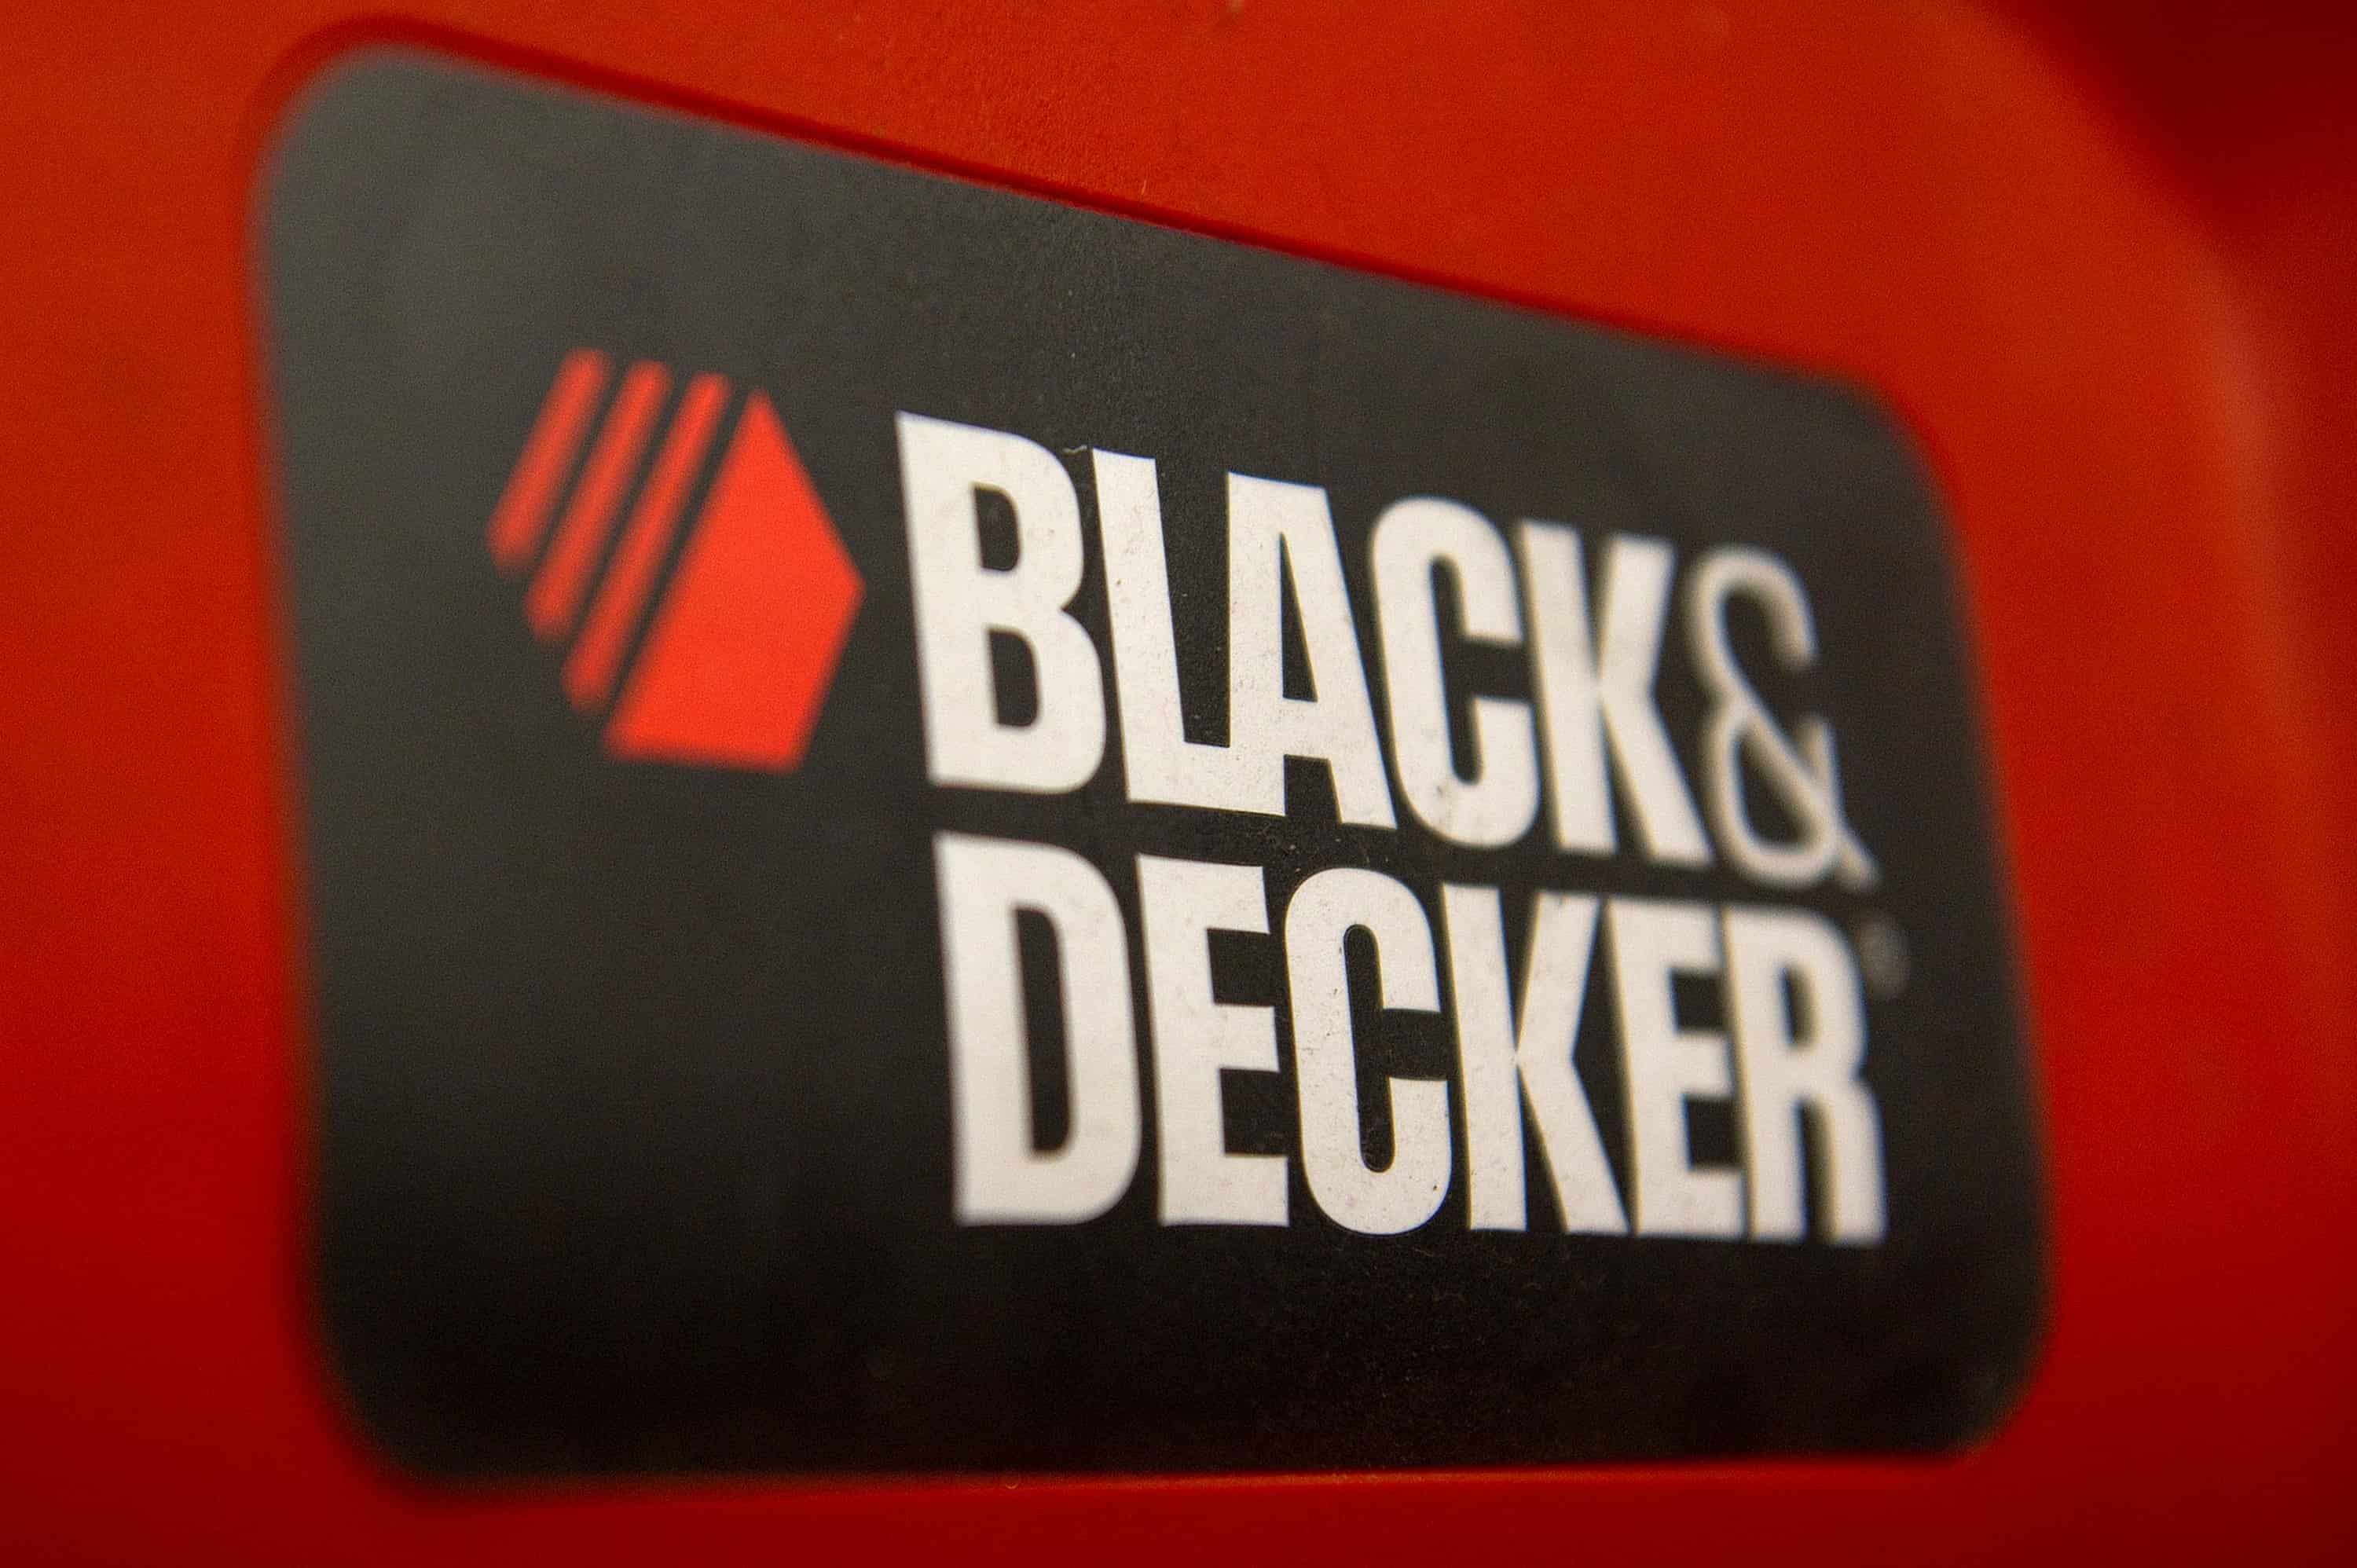 Stanley Black & Decker to Sell Attachment Tools Business